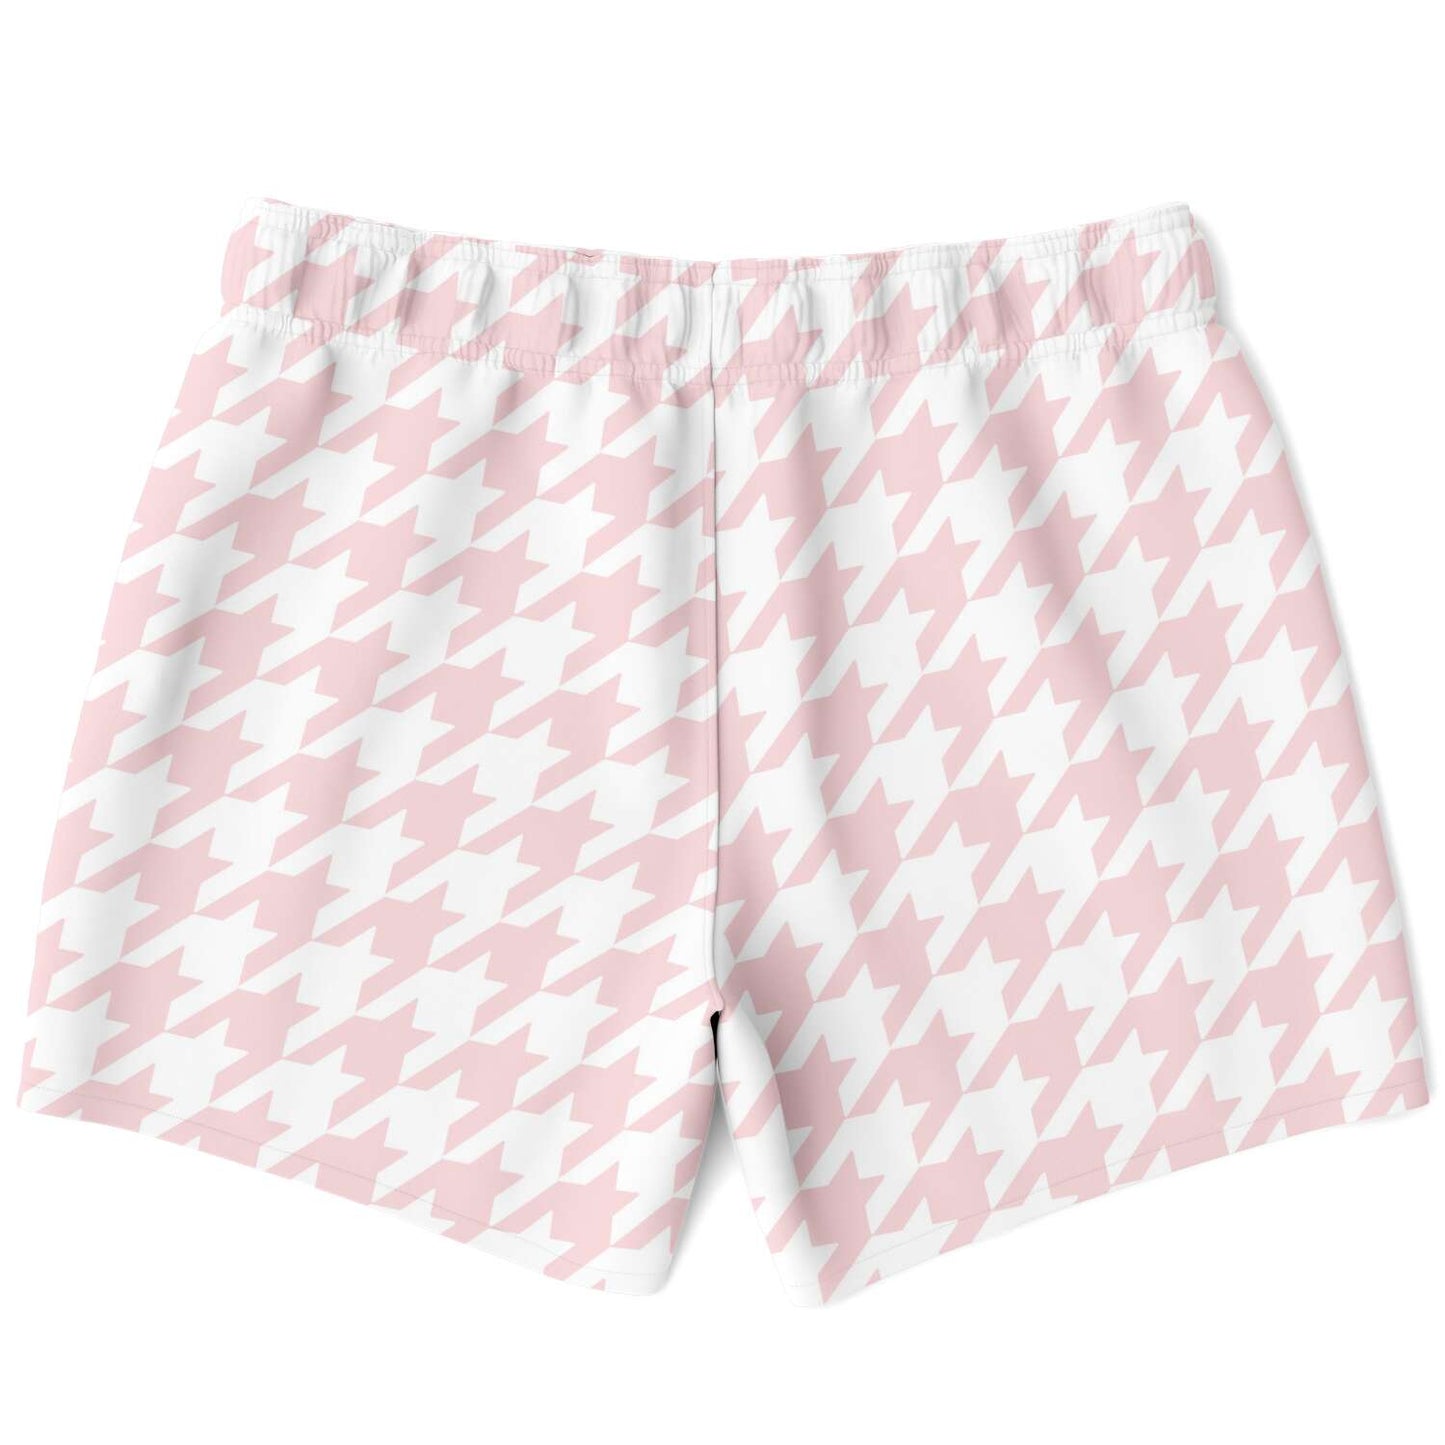 Pale Pink Houndstooth Swim Shorts